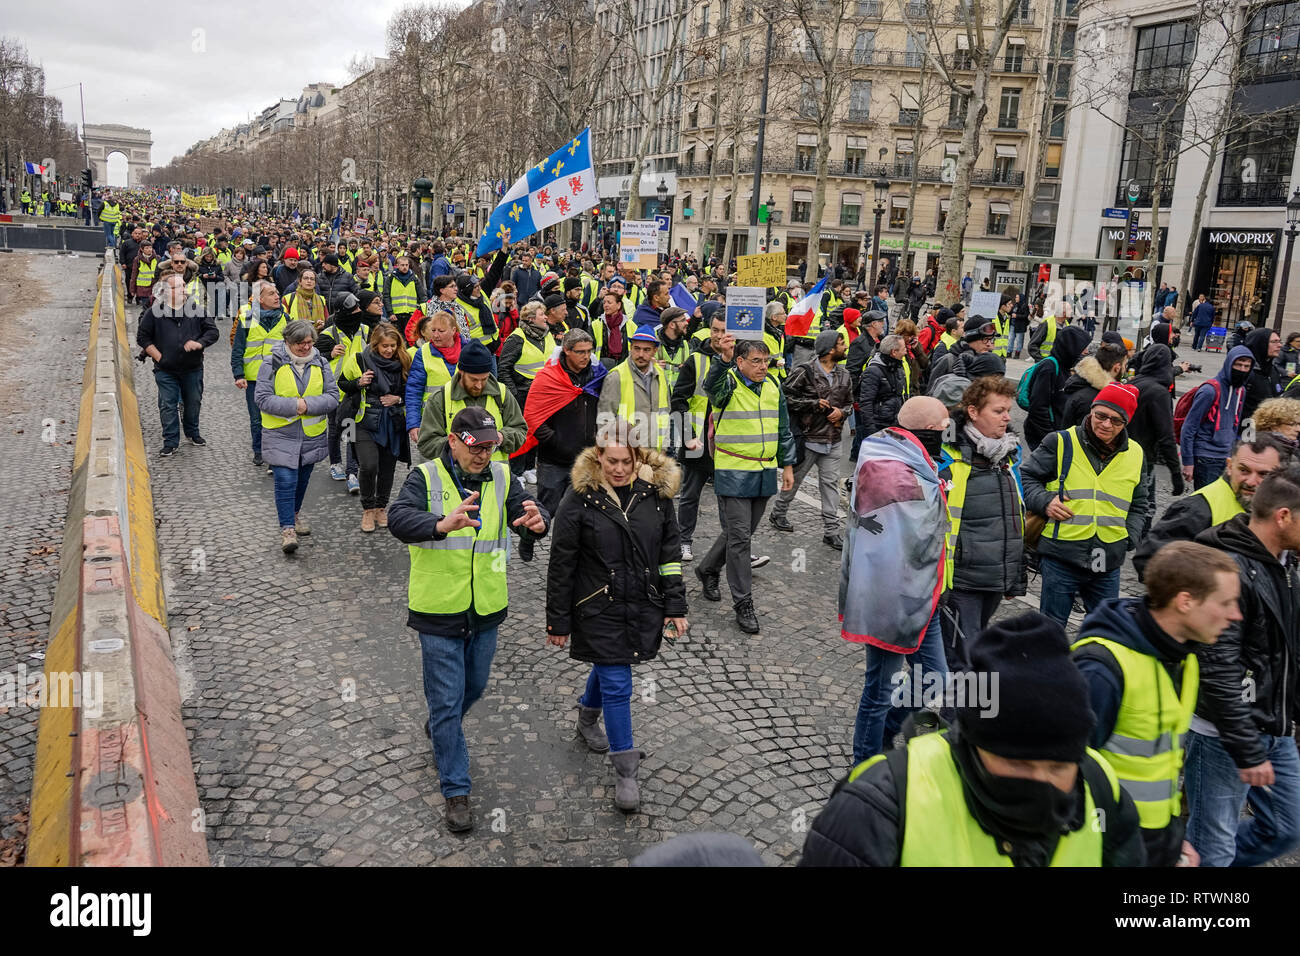 Paris, France. 02 March 2019.Thousands of yellow vests (Gilets Jaunes)  protests in Paris calling for lower fuel taxes, reintroduction of the  solidarity tax on wealth, a minimum wage increase, and Emmanuel Macron's